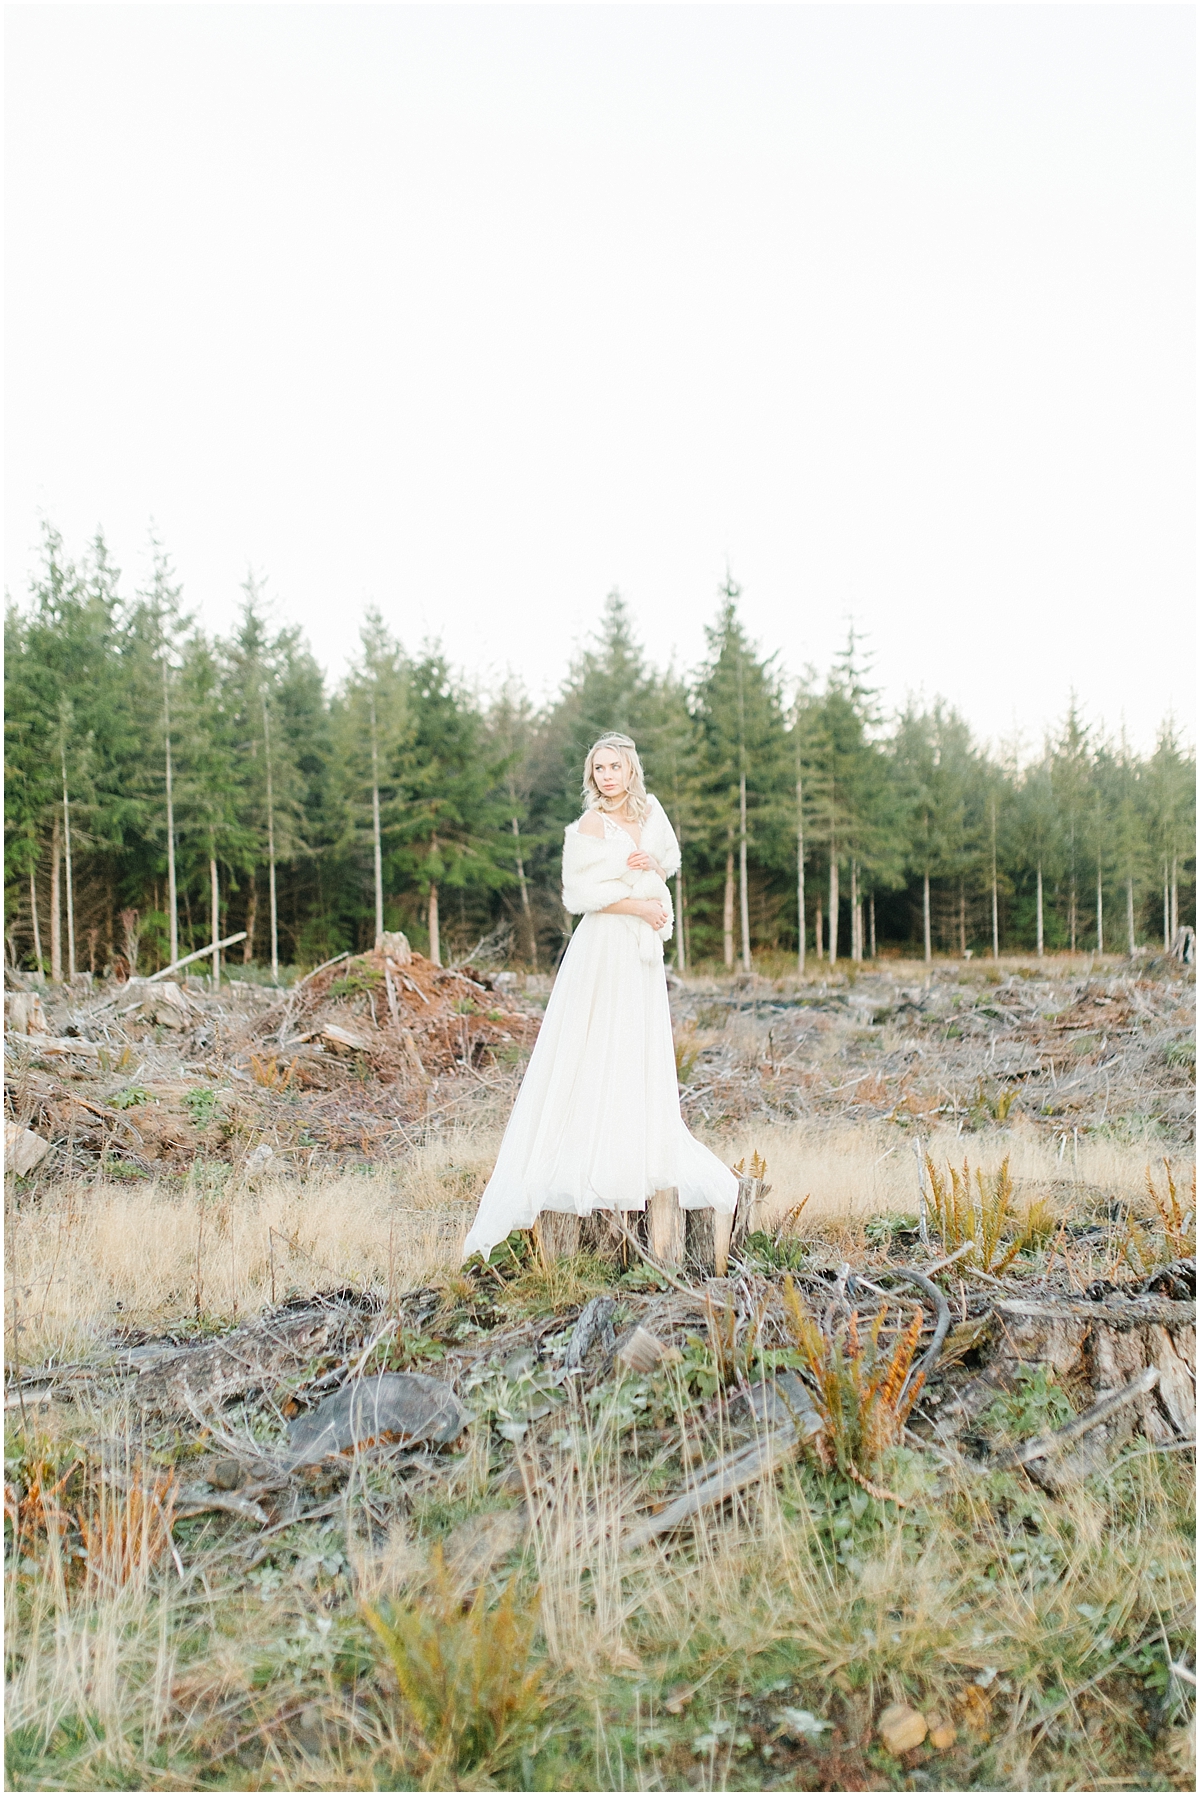 A Light and Airy Styled Shoot Dripping With Romance | Emma Rose Company Seattle Wedding Photographer